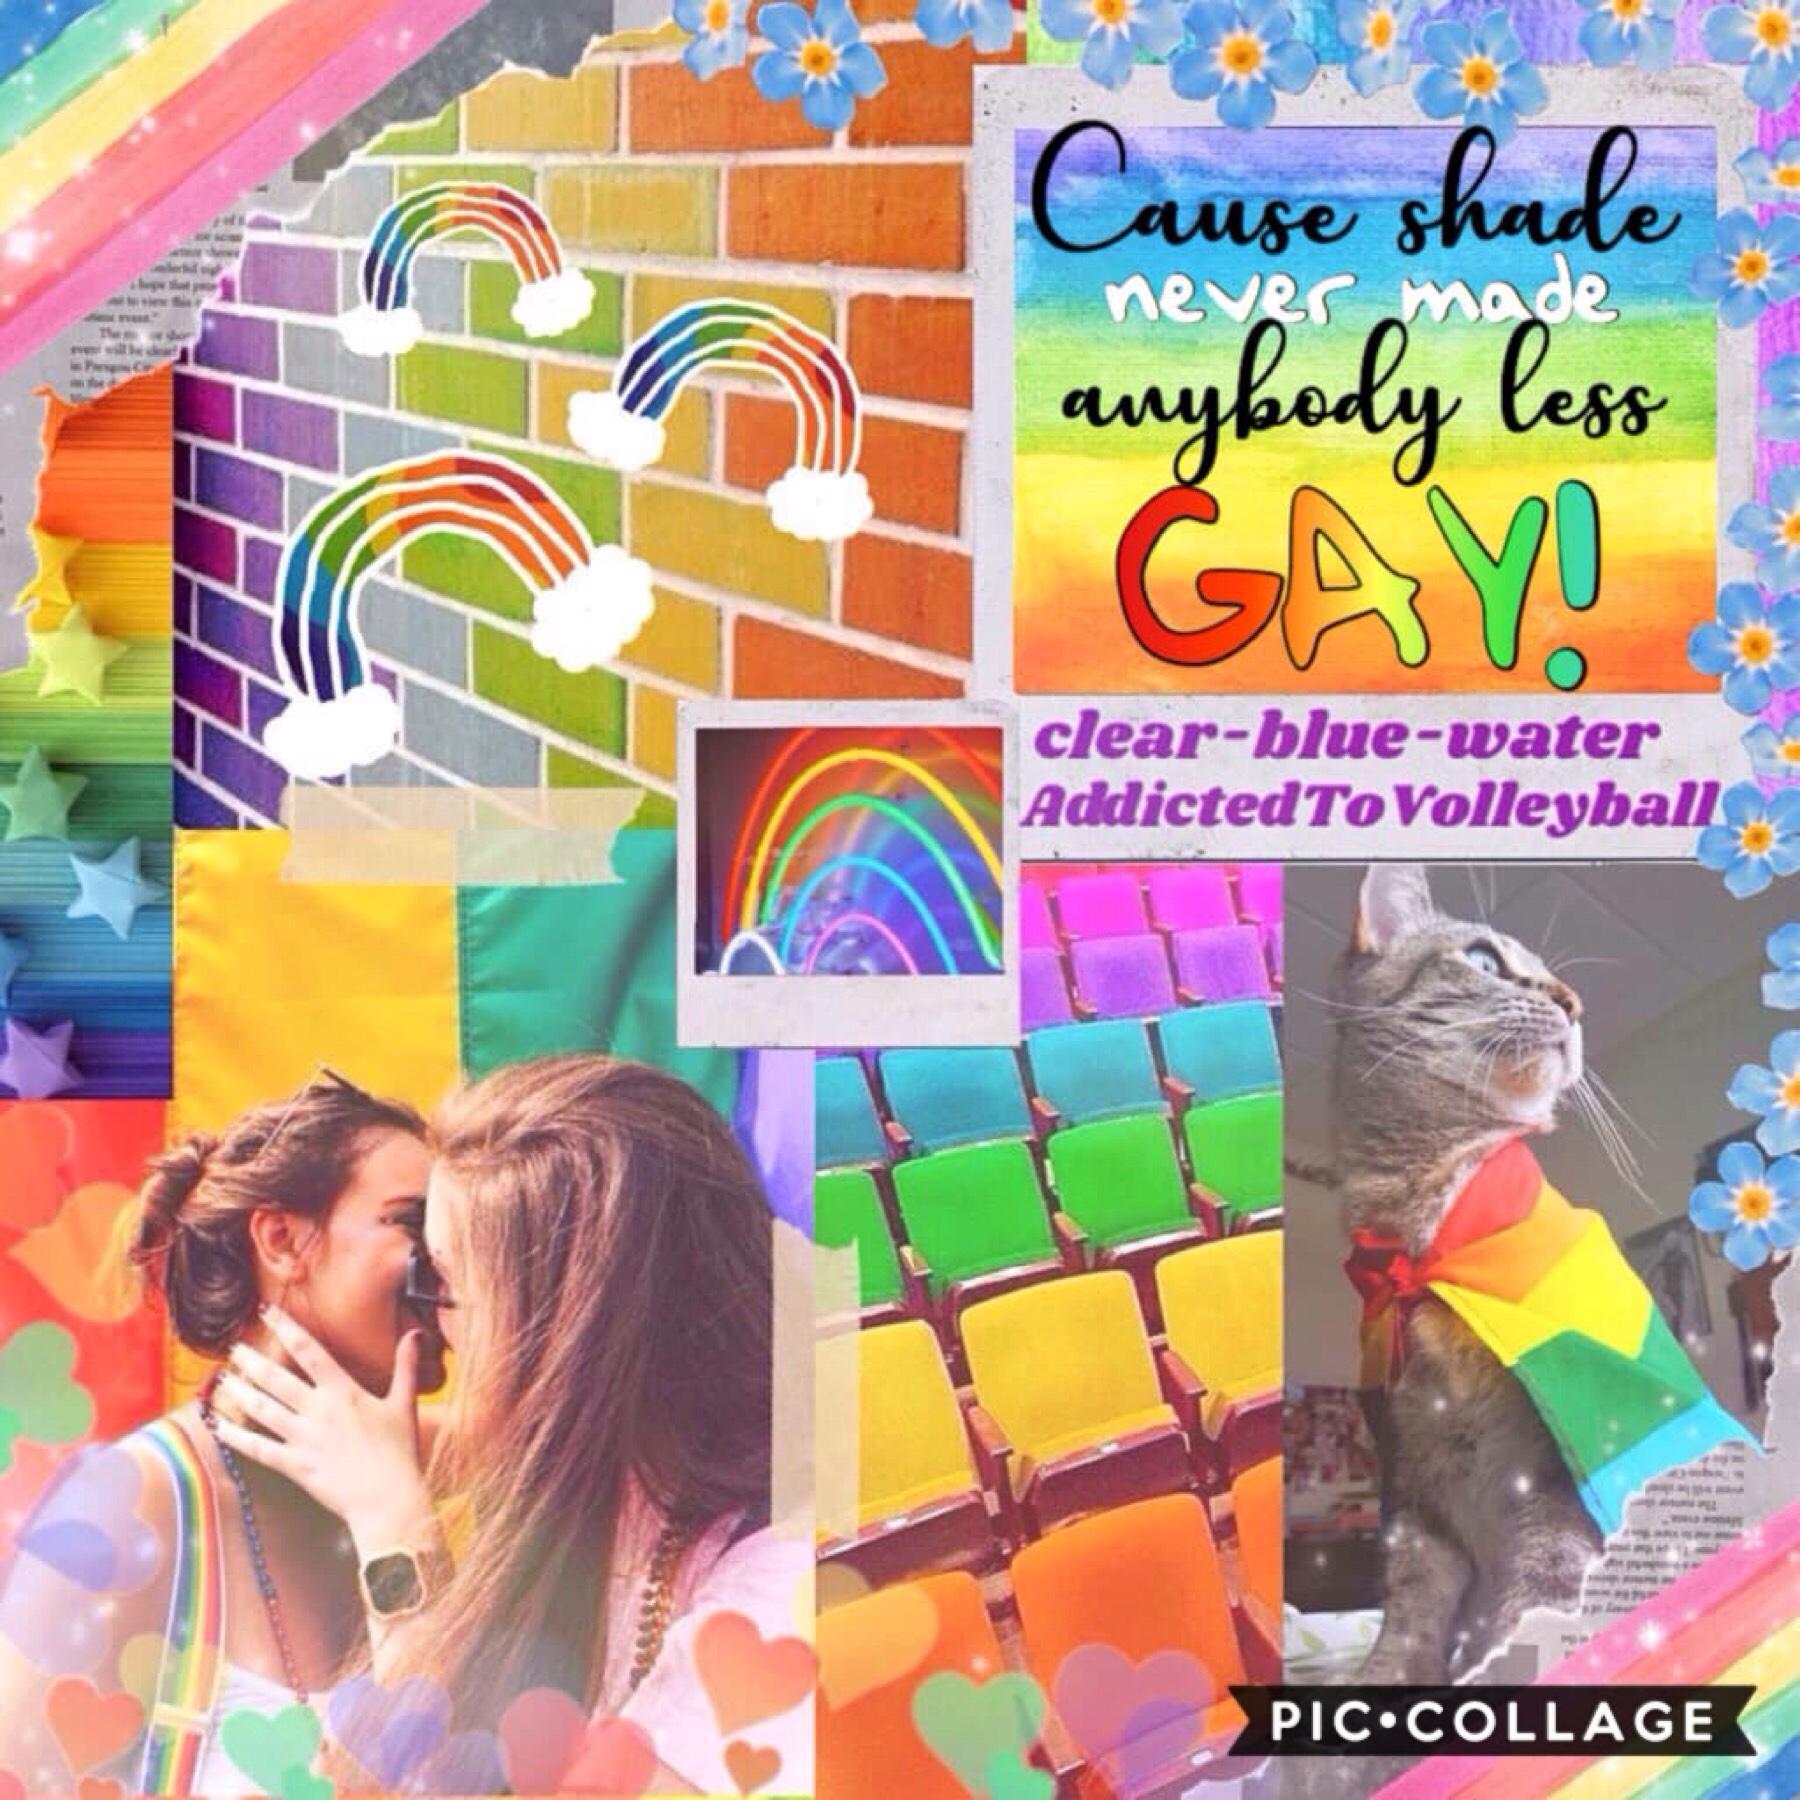 ✨T A P✨
Another Pride Month Collab with AddictedToVolleyball. I did the bg but it was a bit ago so it's kinda bad.
QOTD: Are you a member of the LBGTQ+ community?
AOTD: No but I completely support the community